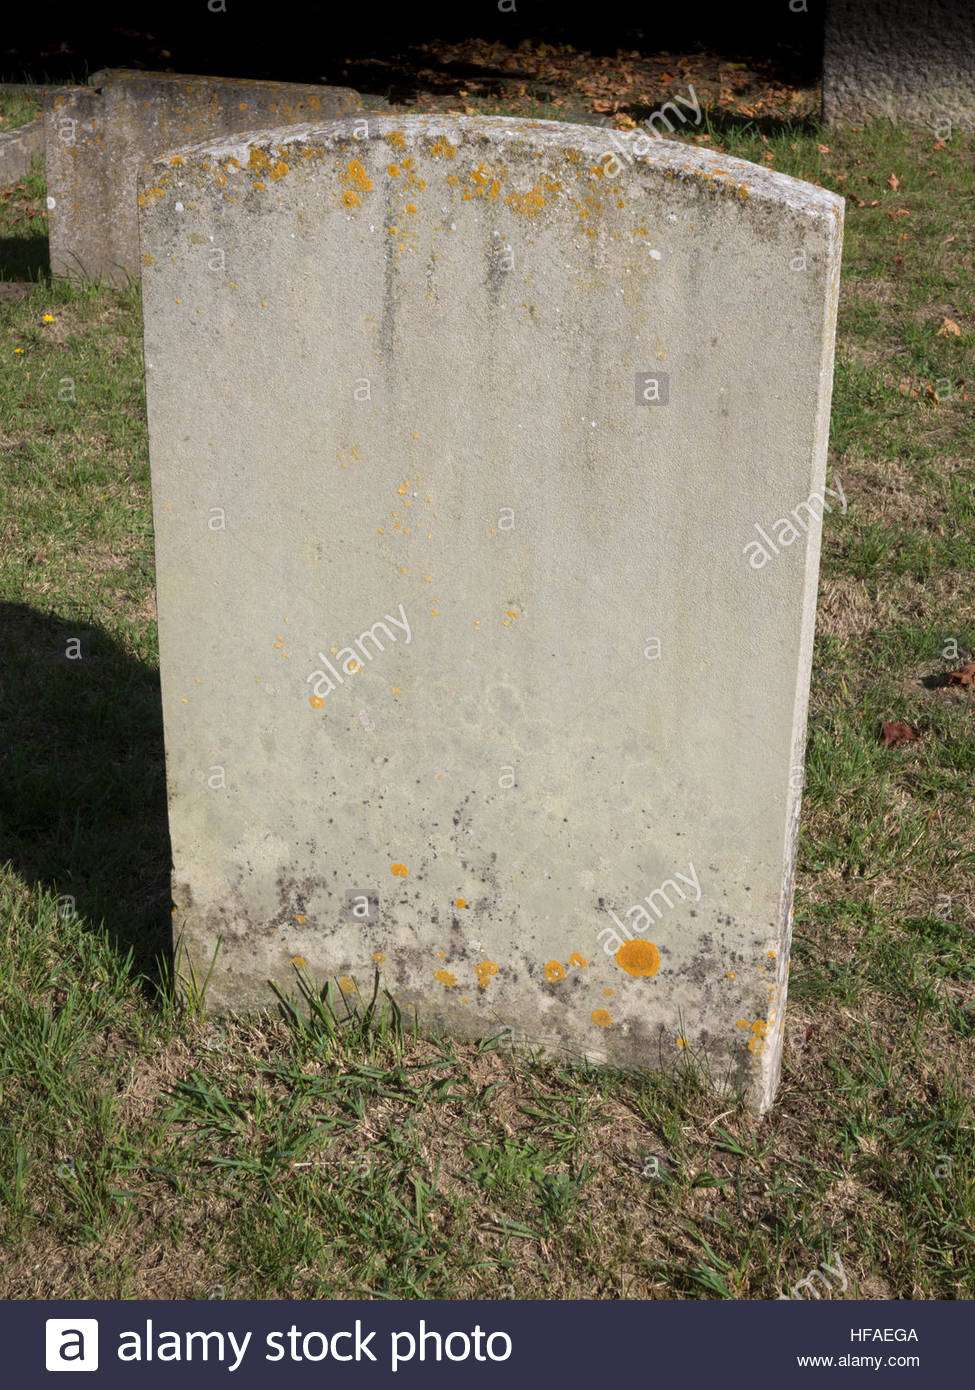 Plain Headstone With Curved Top Against A Green Background Stock